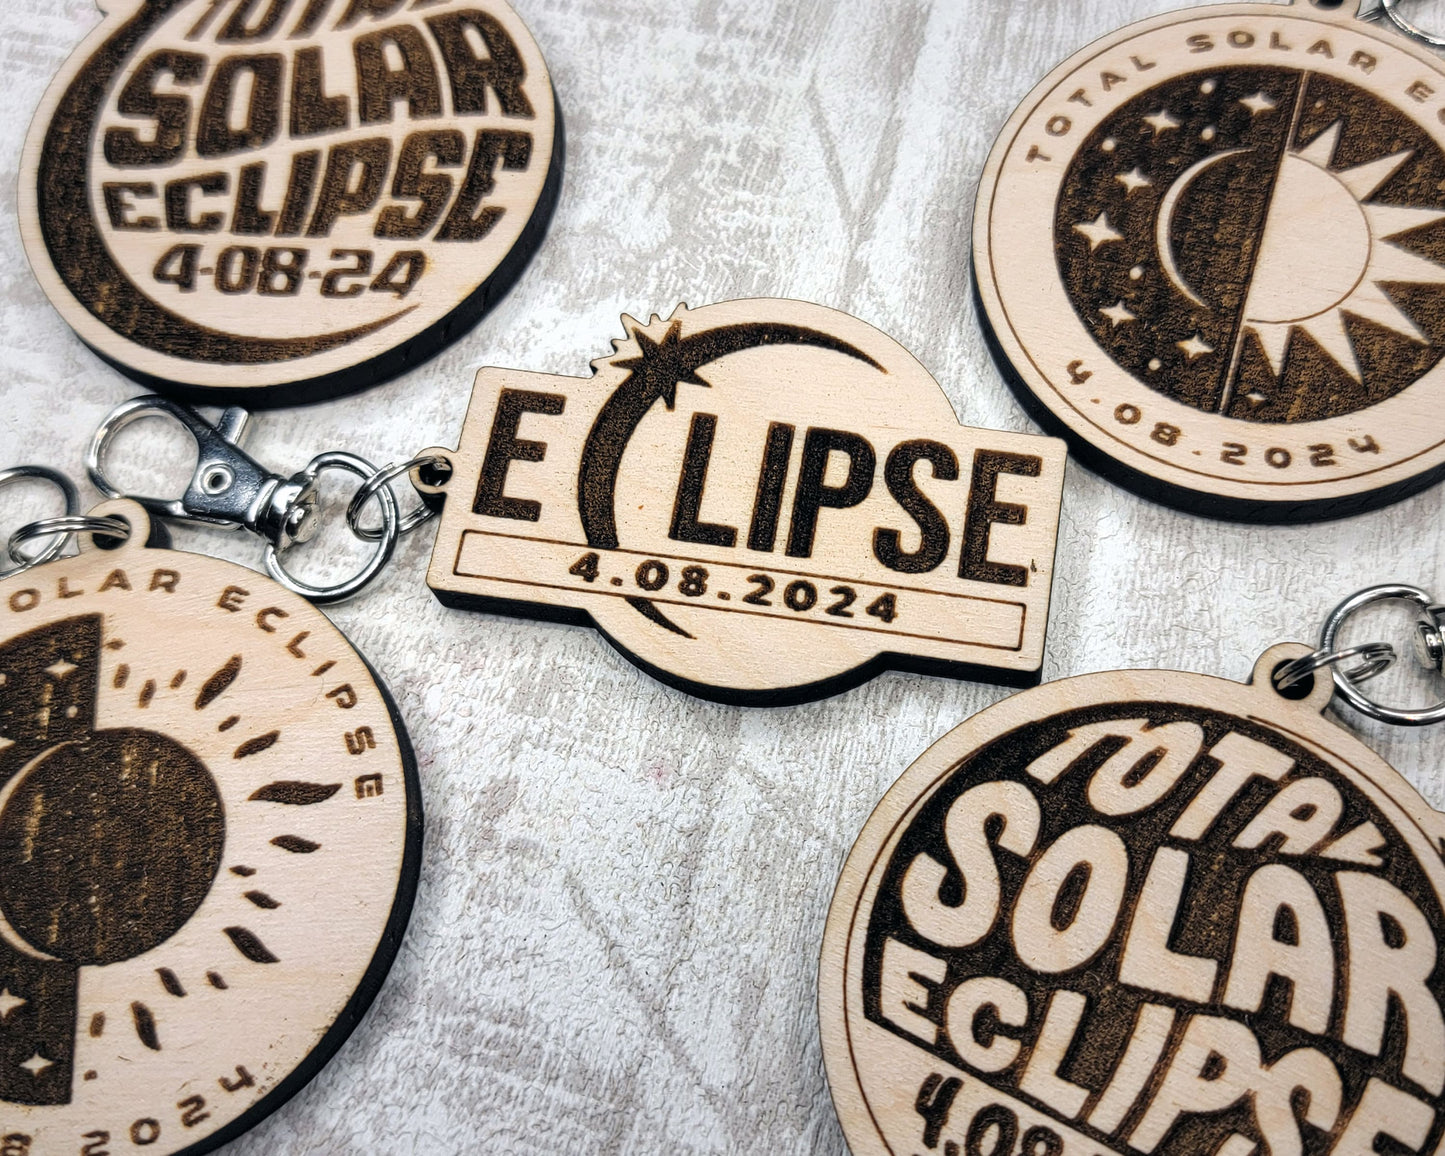 Solar Eclipse Keychains - 7 Options Included - Tested on Glowforge & Lightburn